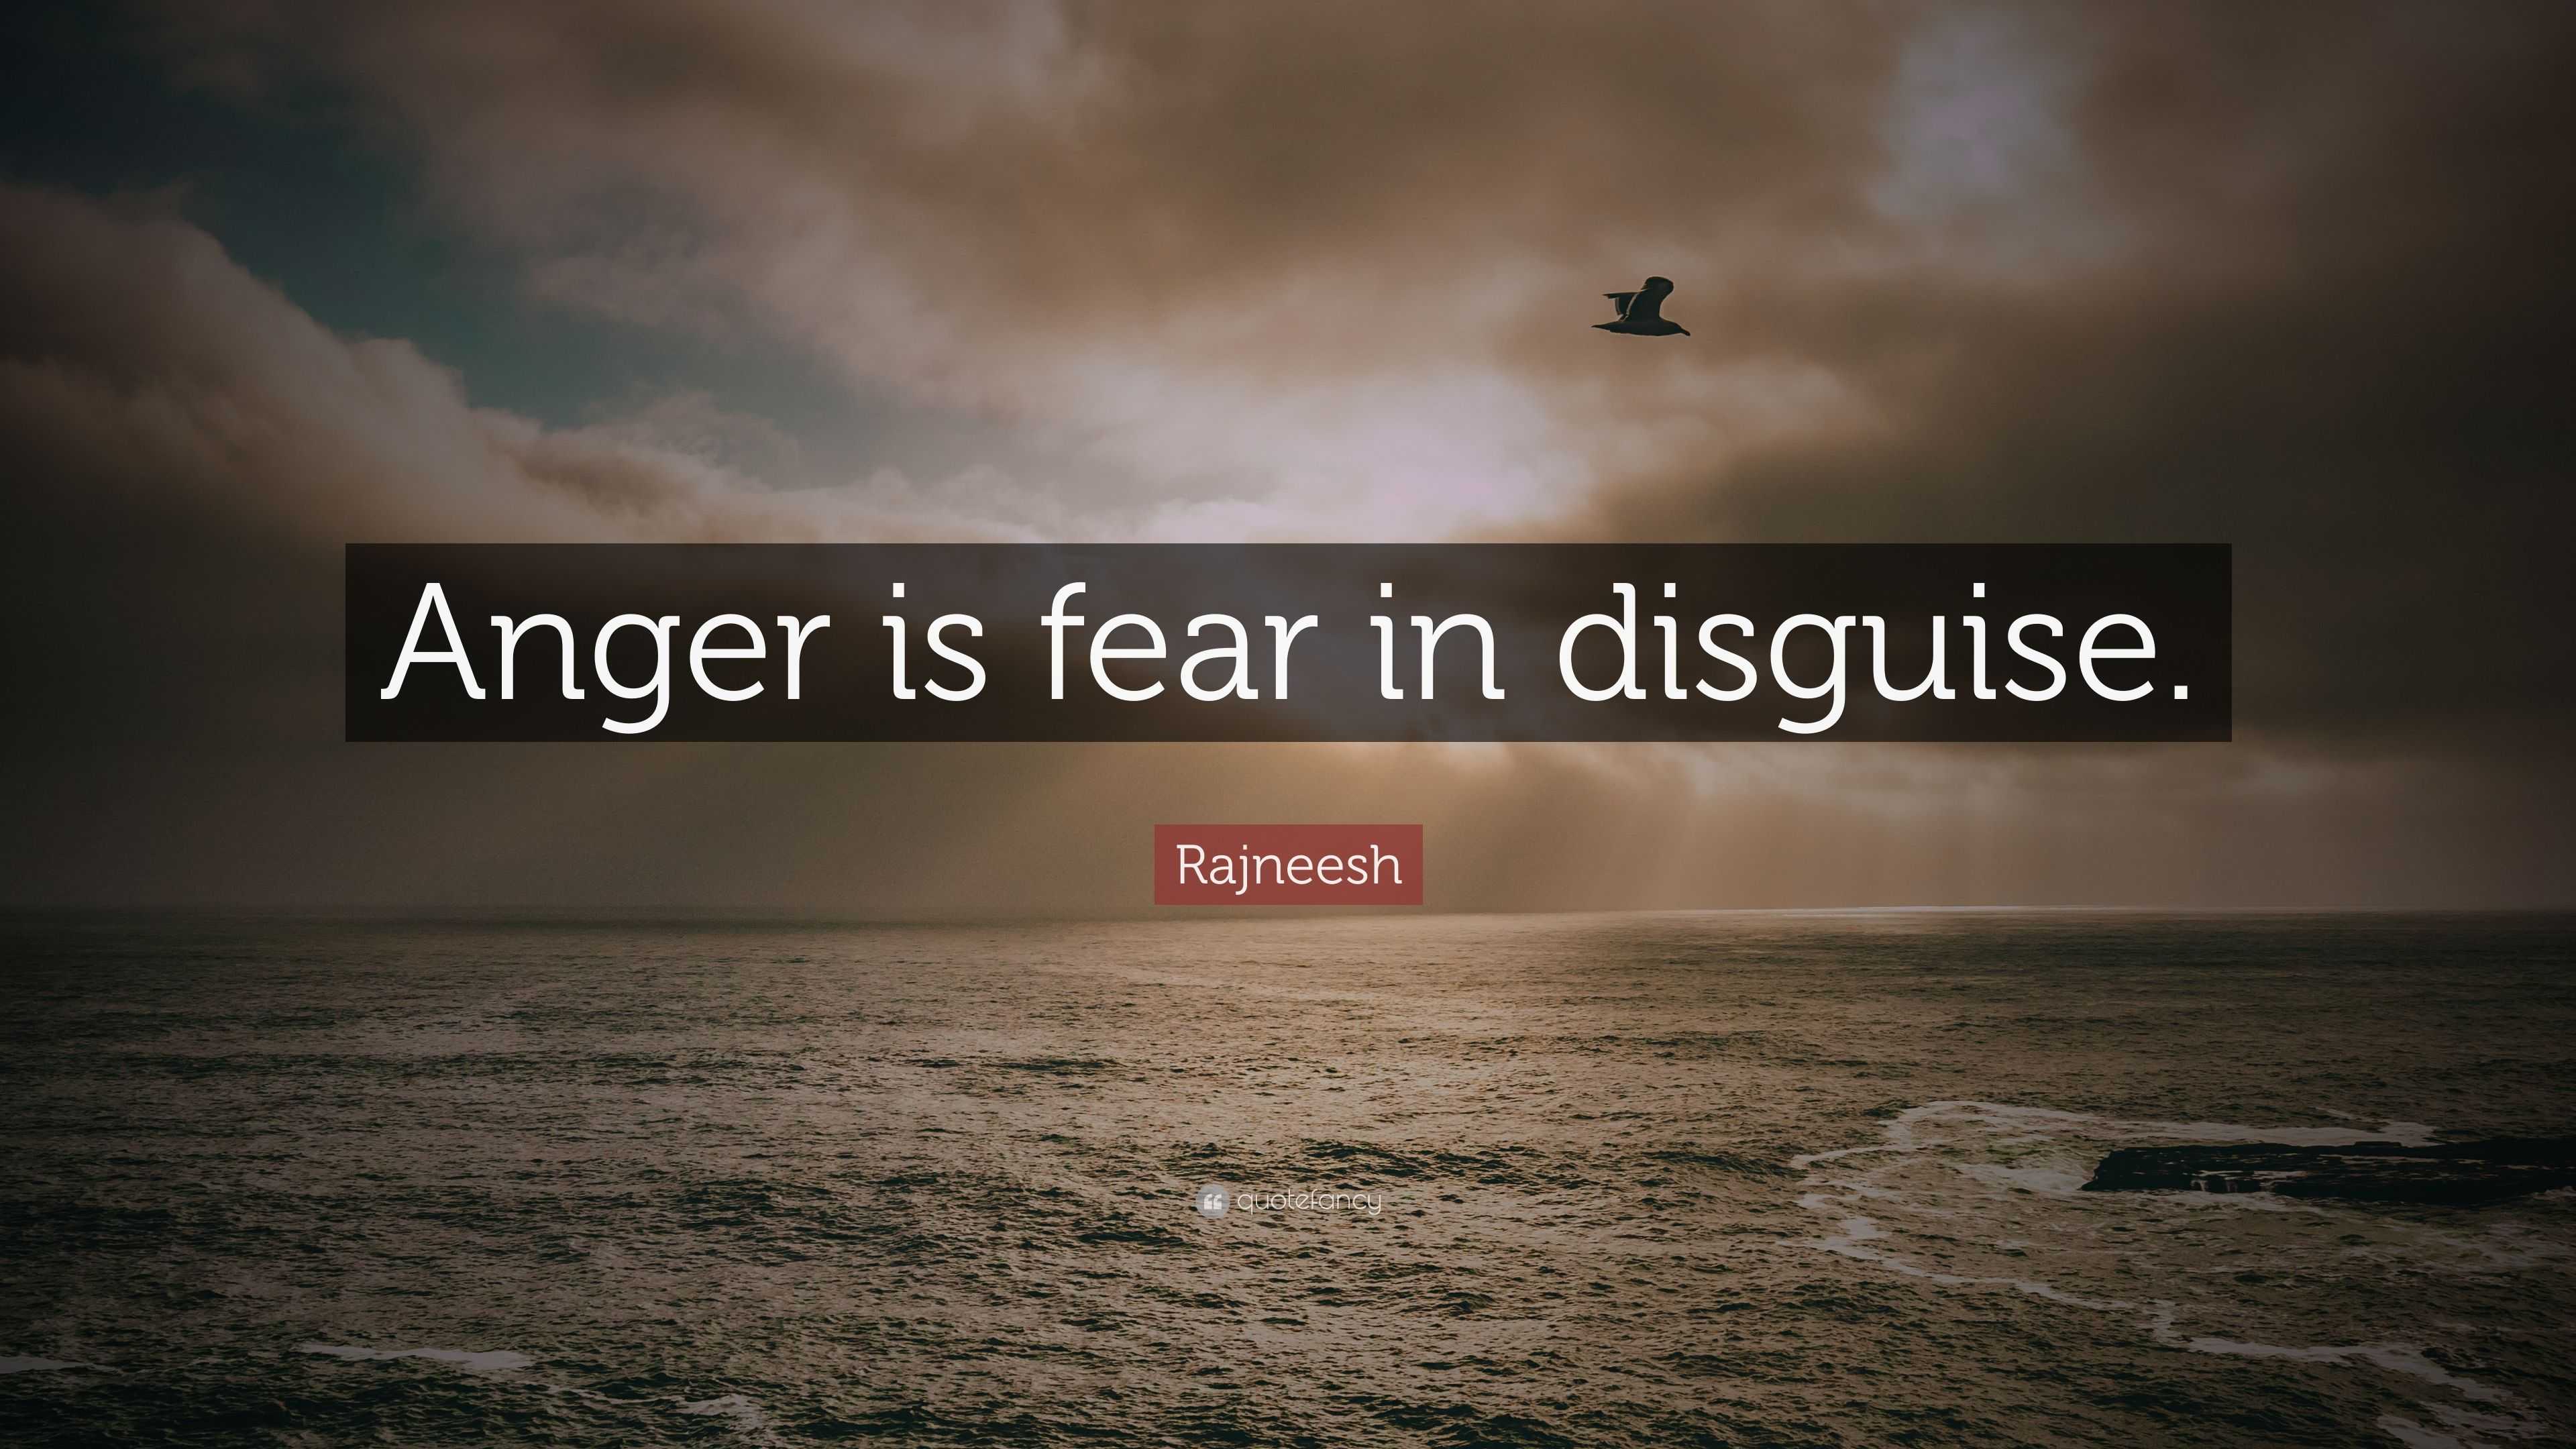 4838790-Rajneesh-Quote-Anger-is-fear-in-disguise.jpg 